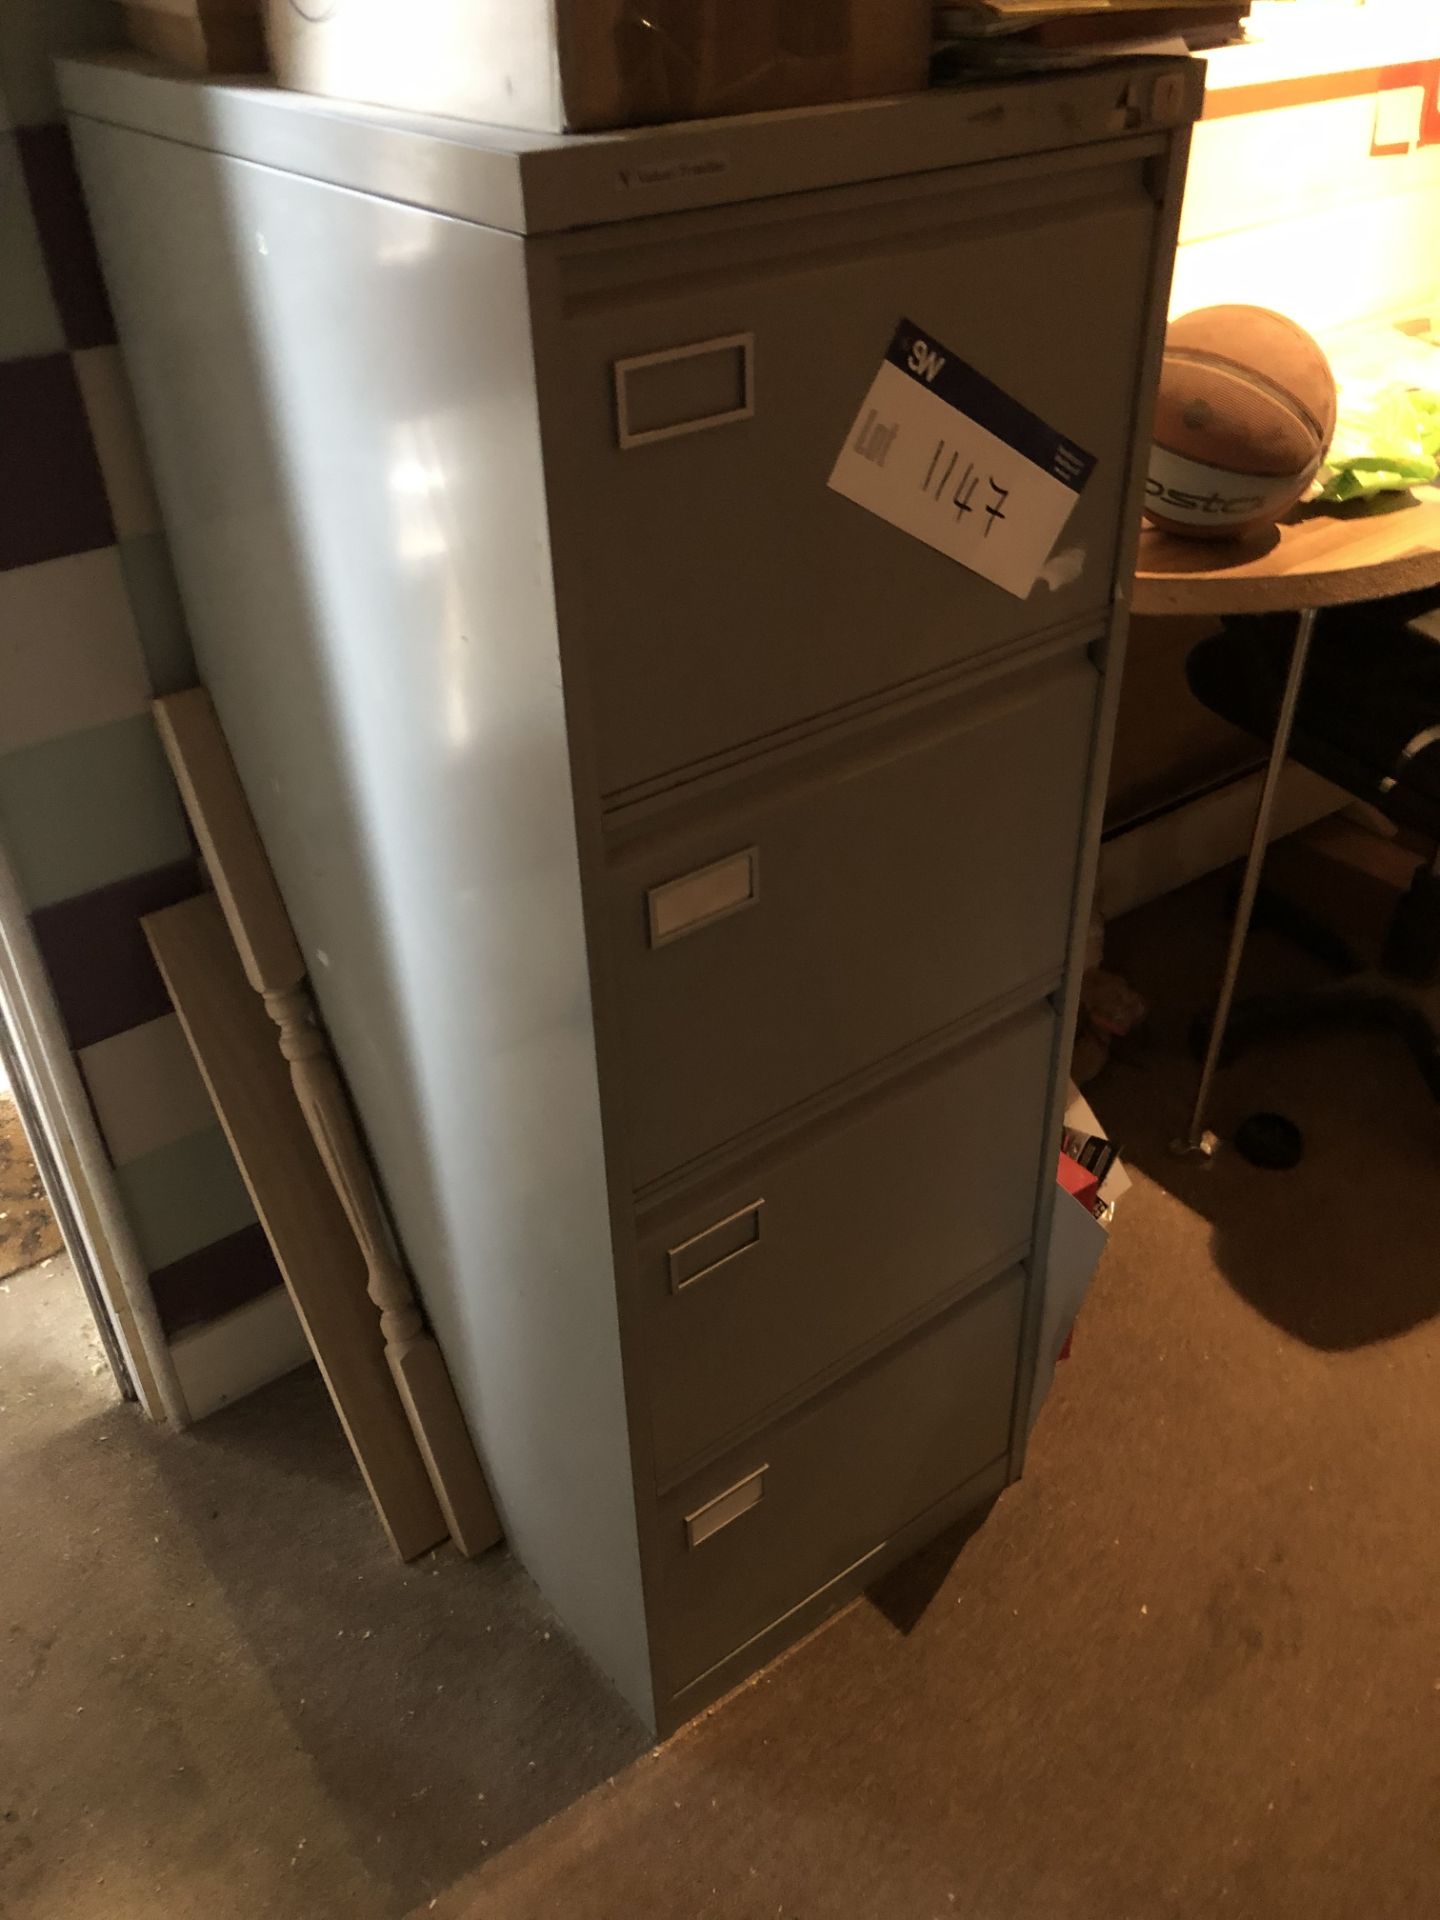 Vickers Trimline Four Drawer Steel Filing Cabinet